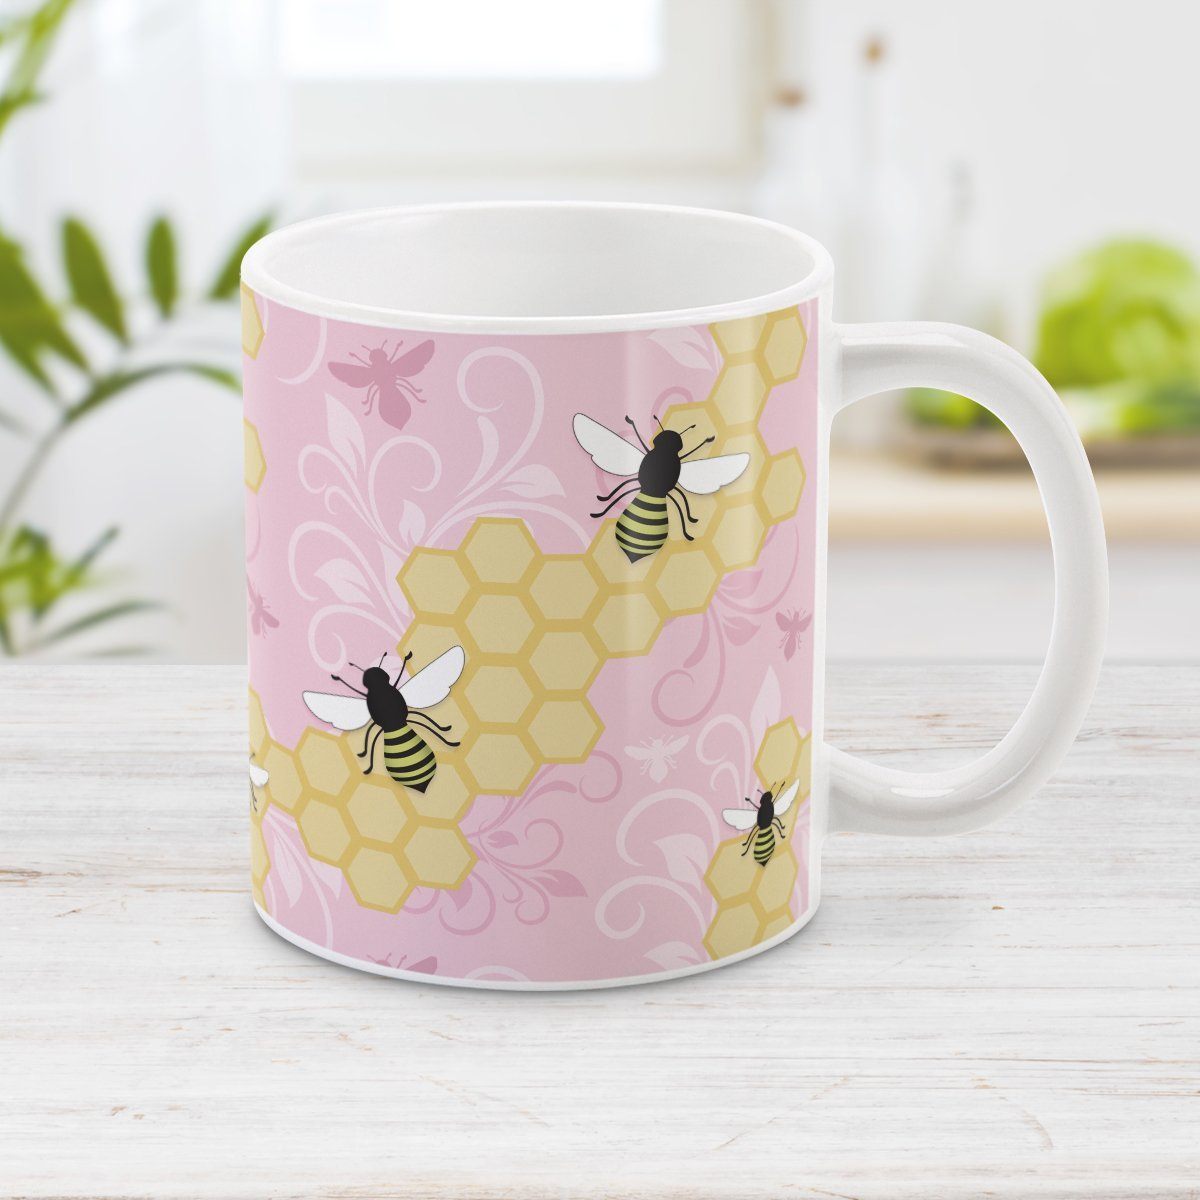 Pink Honeycomb Bee Mug at Amy's Coffee Mugs. A ceramic coffee mug designed with a pattern of black and yellow bees on honeycomb lines over a pink flourish background that wraps around the mug to the handle.